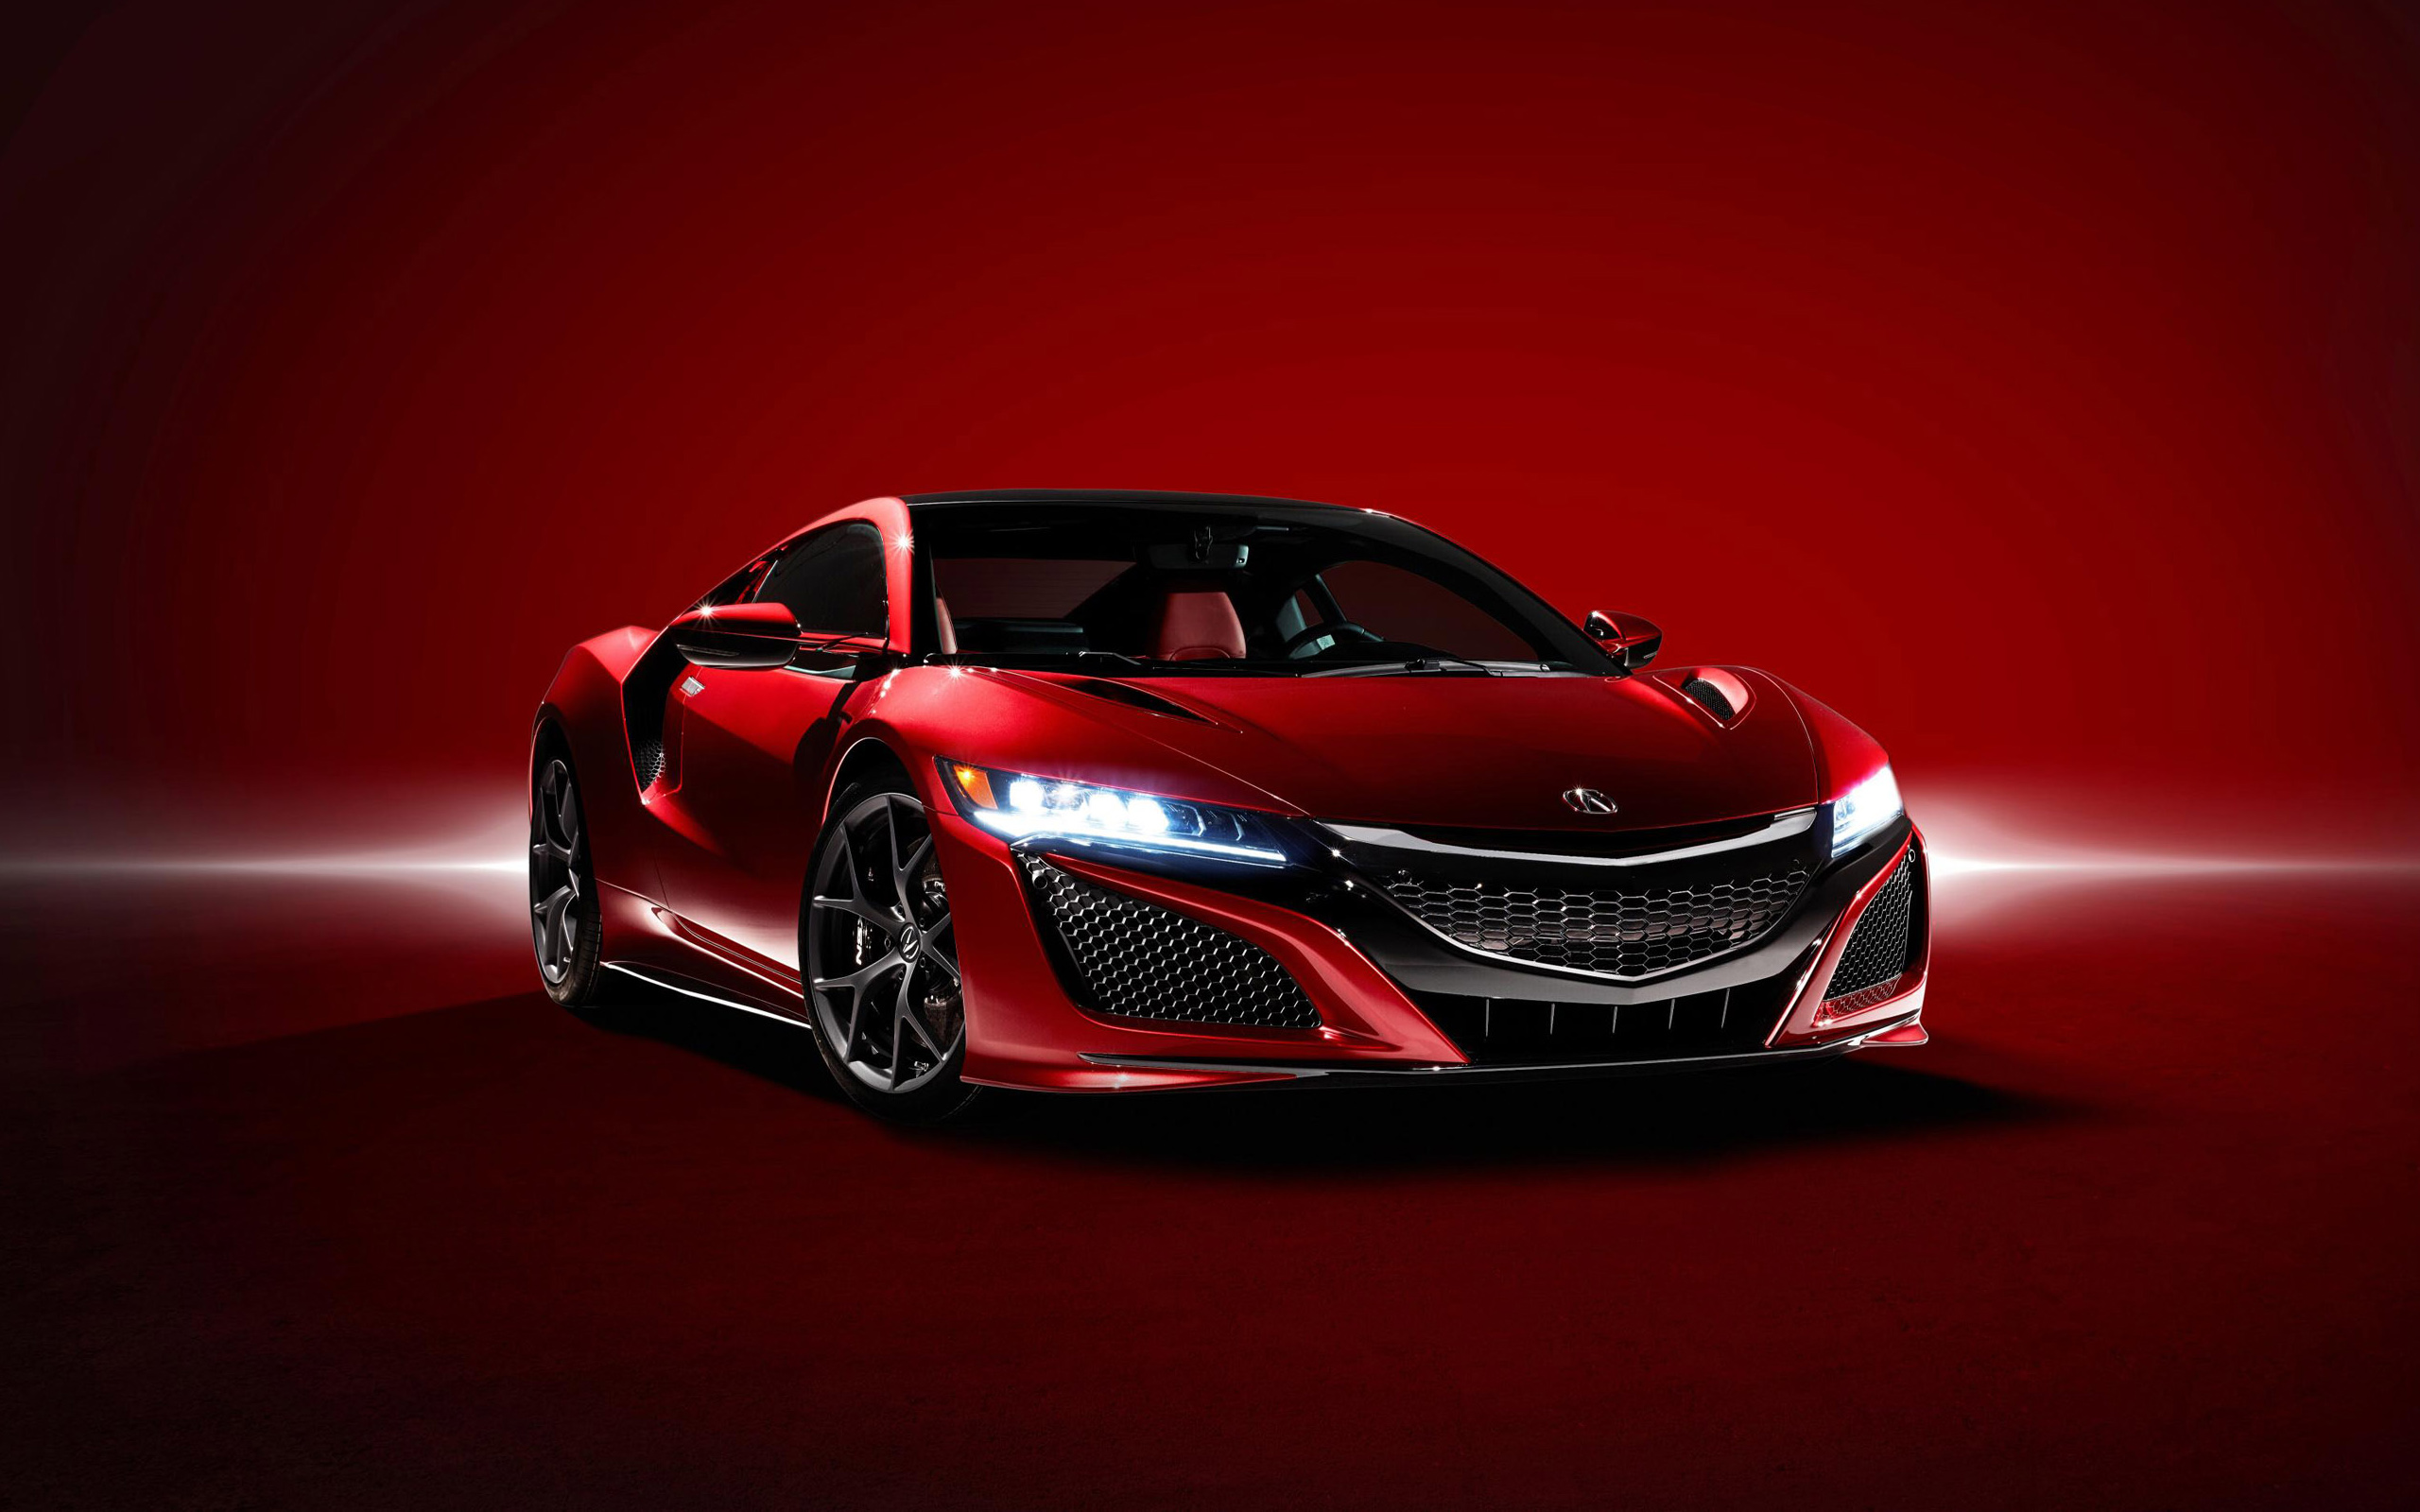 2016 Acura NSX Supercar Wallpapers HD Wallpapers